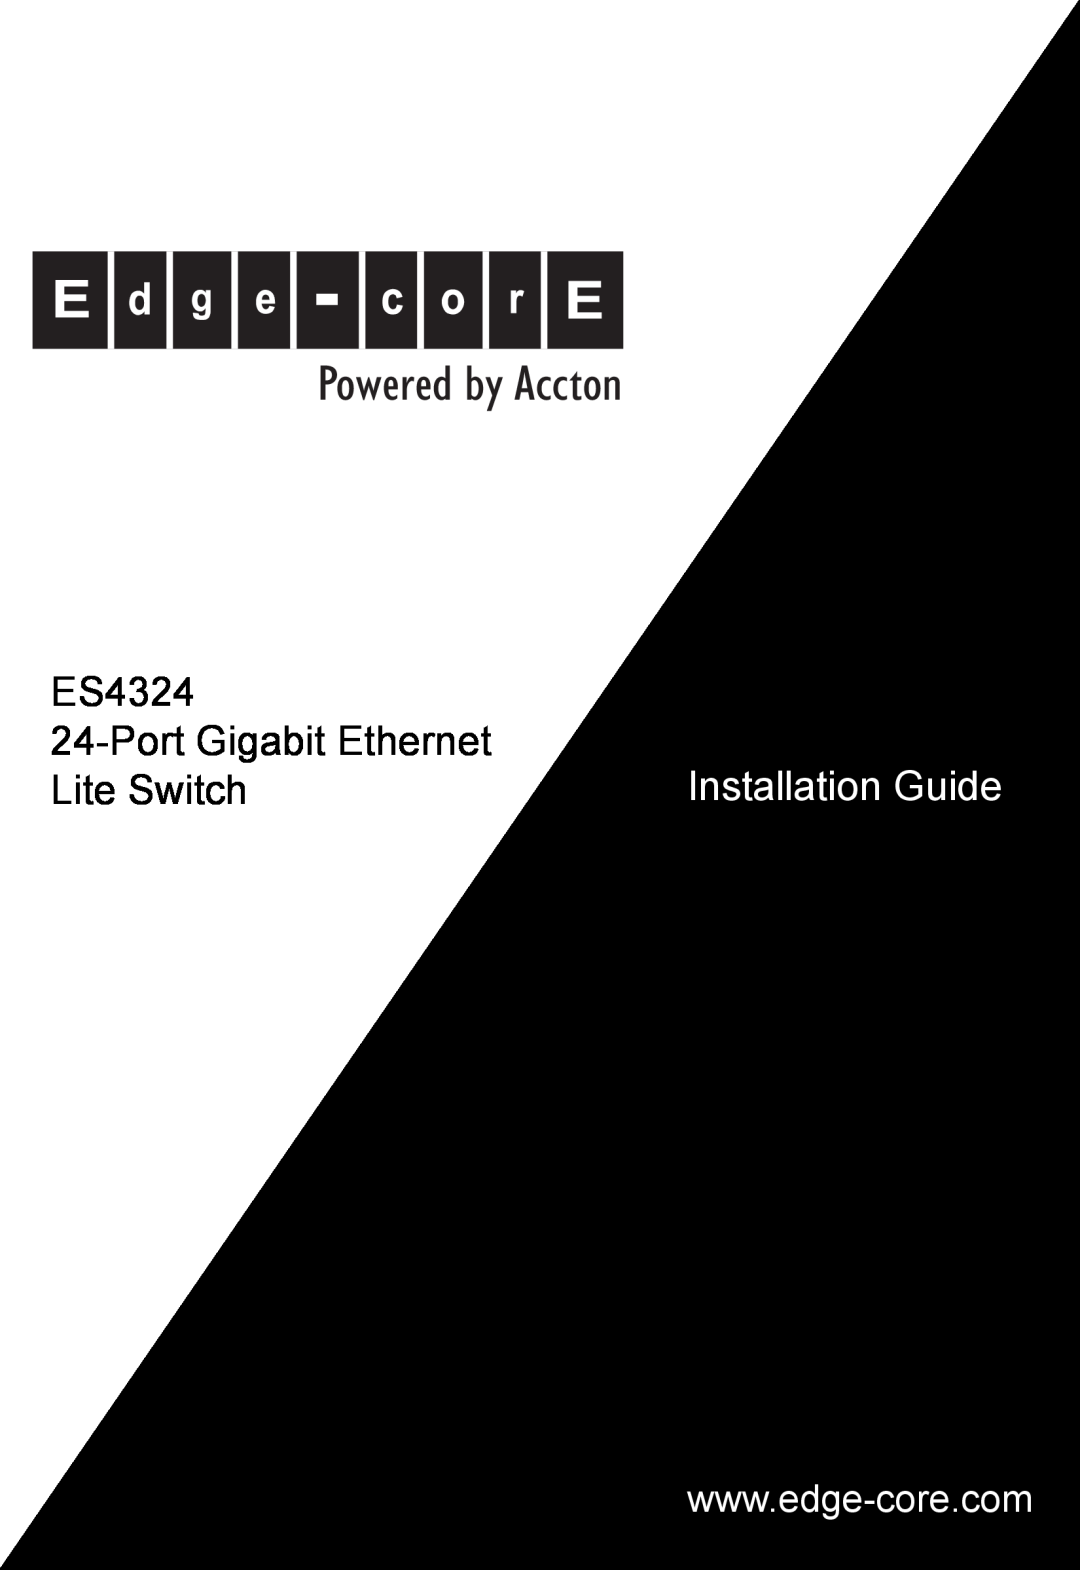 Accton Technology ES4324 manual Powered by Accton, Port Gigabit Ethernet, Installation Guide, Lite Switch 